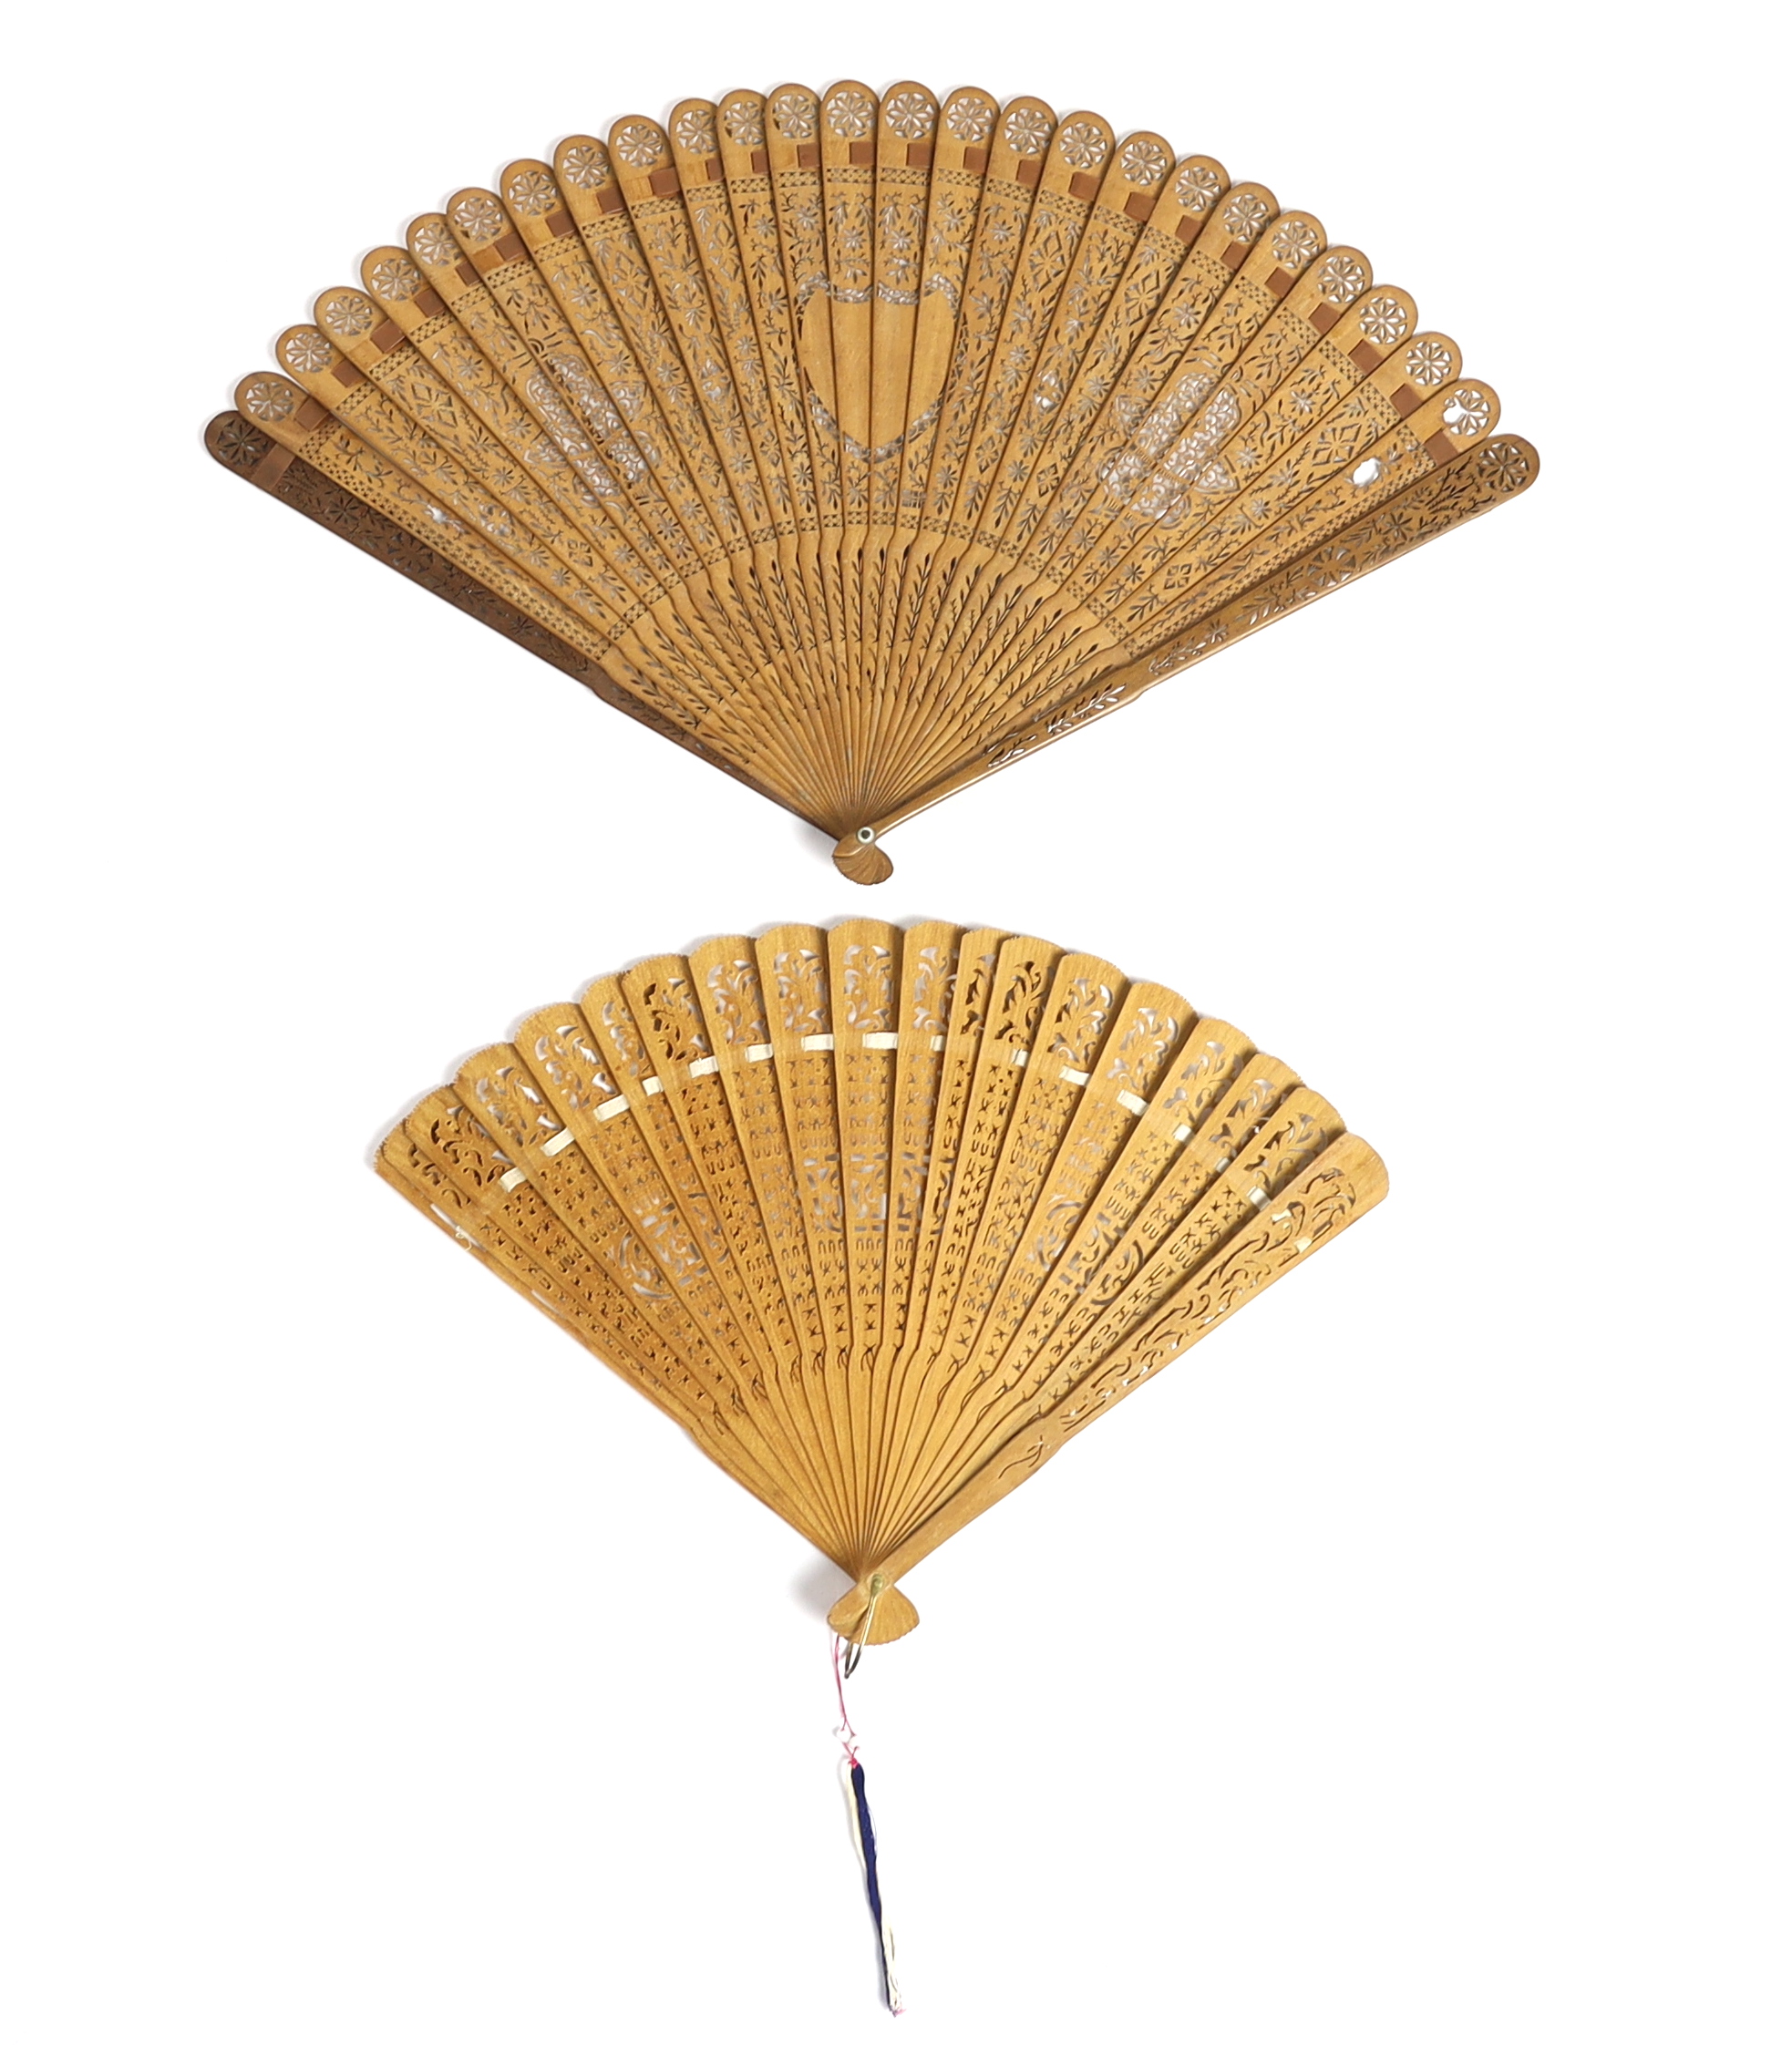 A 19th century Chinese sandalwood brisé fan and a smaller 20th century Chinese sandalwood fan